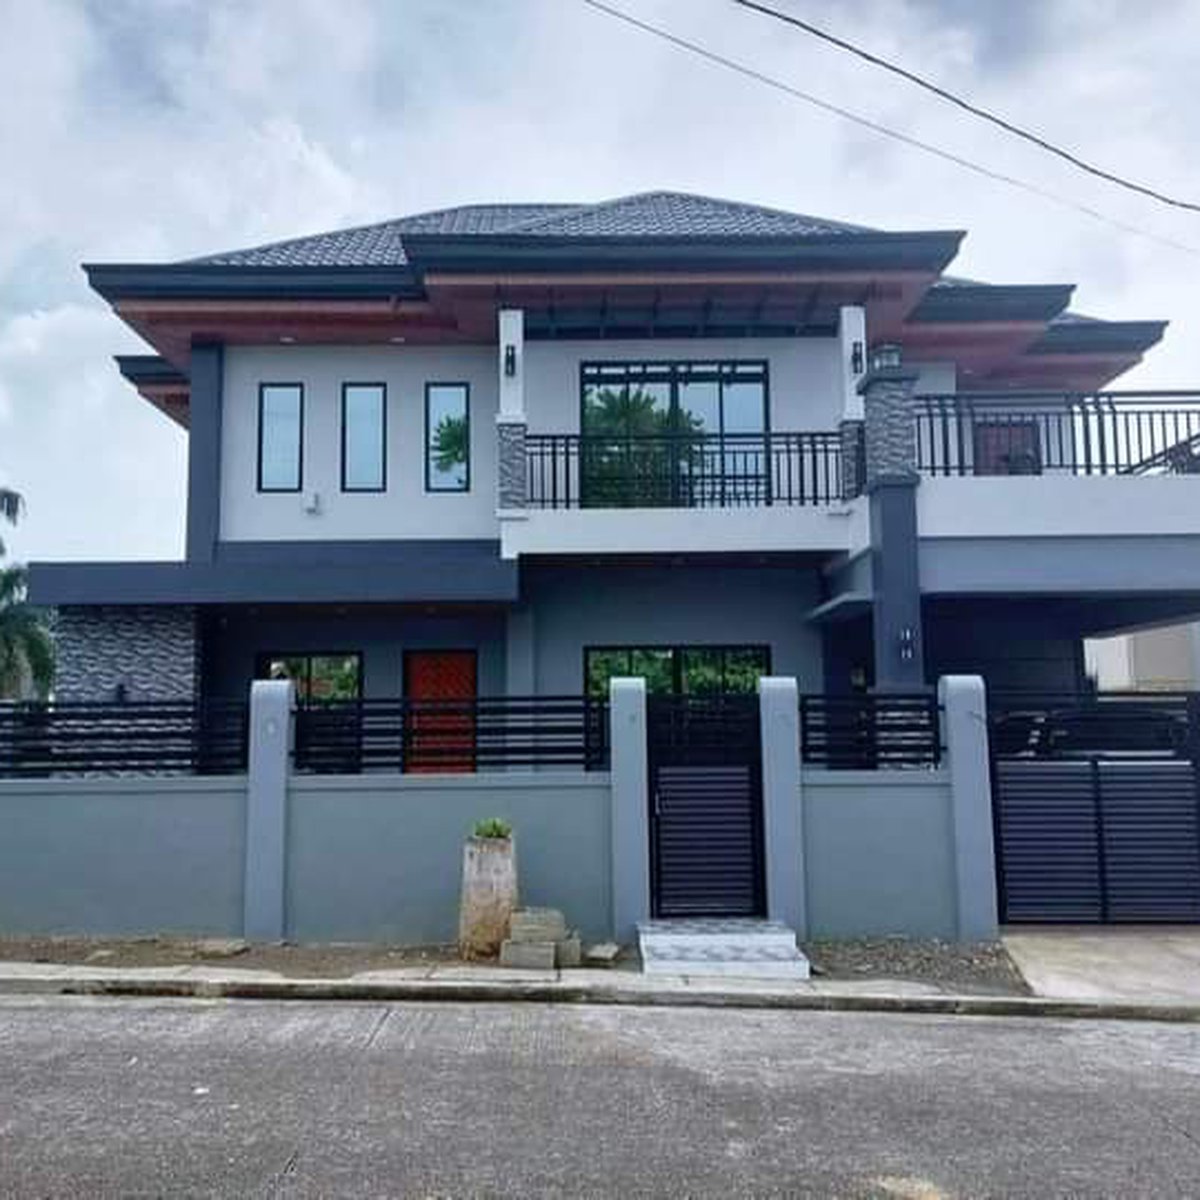 4-bedroom Single Detached House For Sale in Davao City Davao del Sur